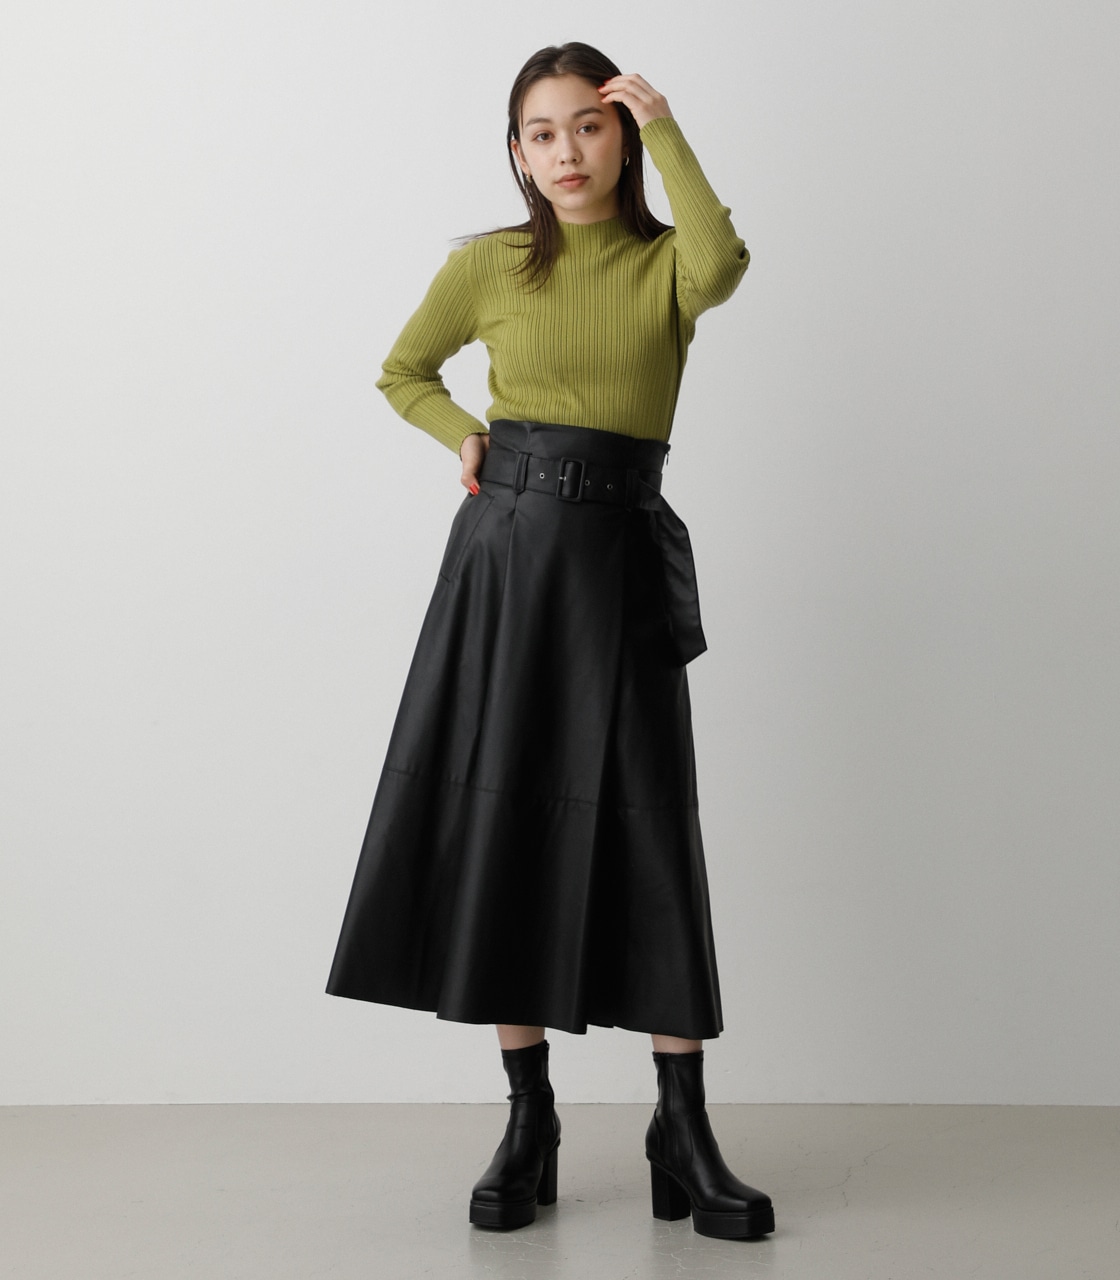 FAUX LEATHER HIGH WAIST SKIRT/フェイクレザーハイウエストスカート 詳細画像 BLK 4